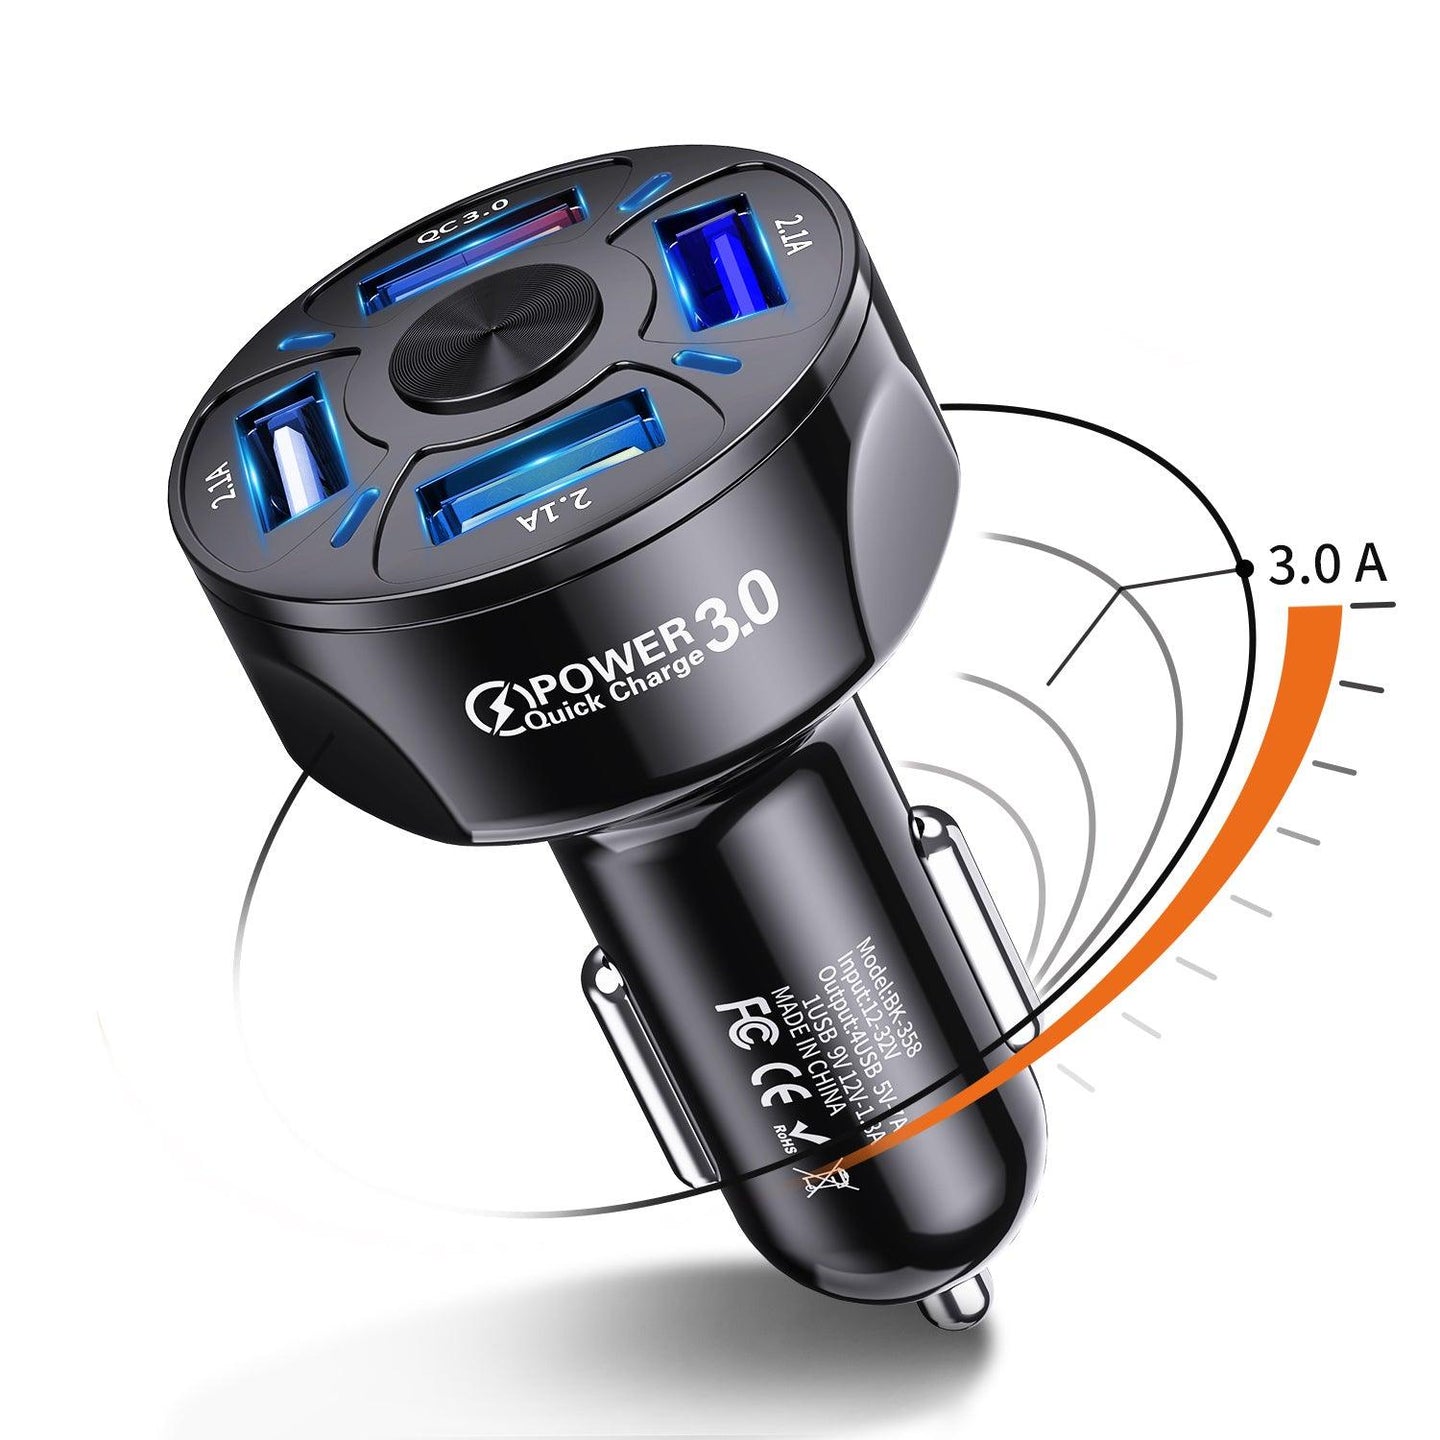 PBG LED 4 Port Rapid Car Charger - Charges 4 Devices at once! - PremiumBrandGoods